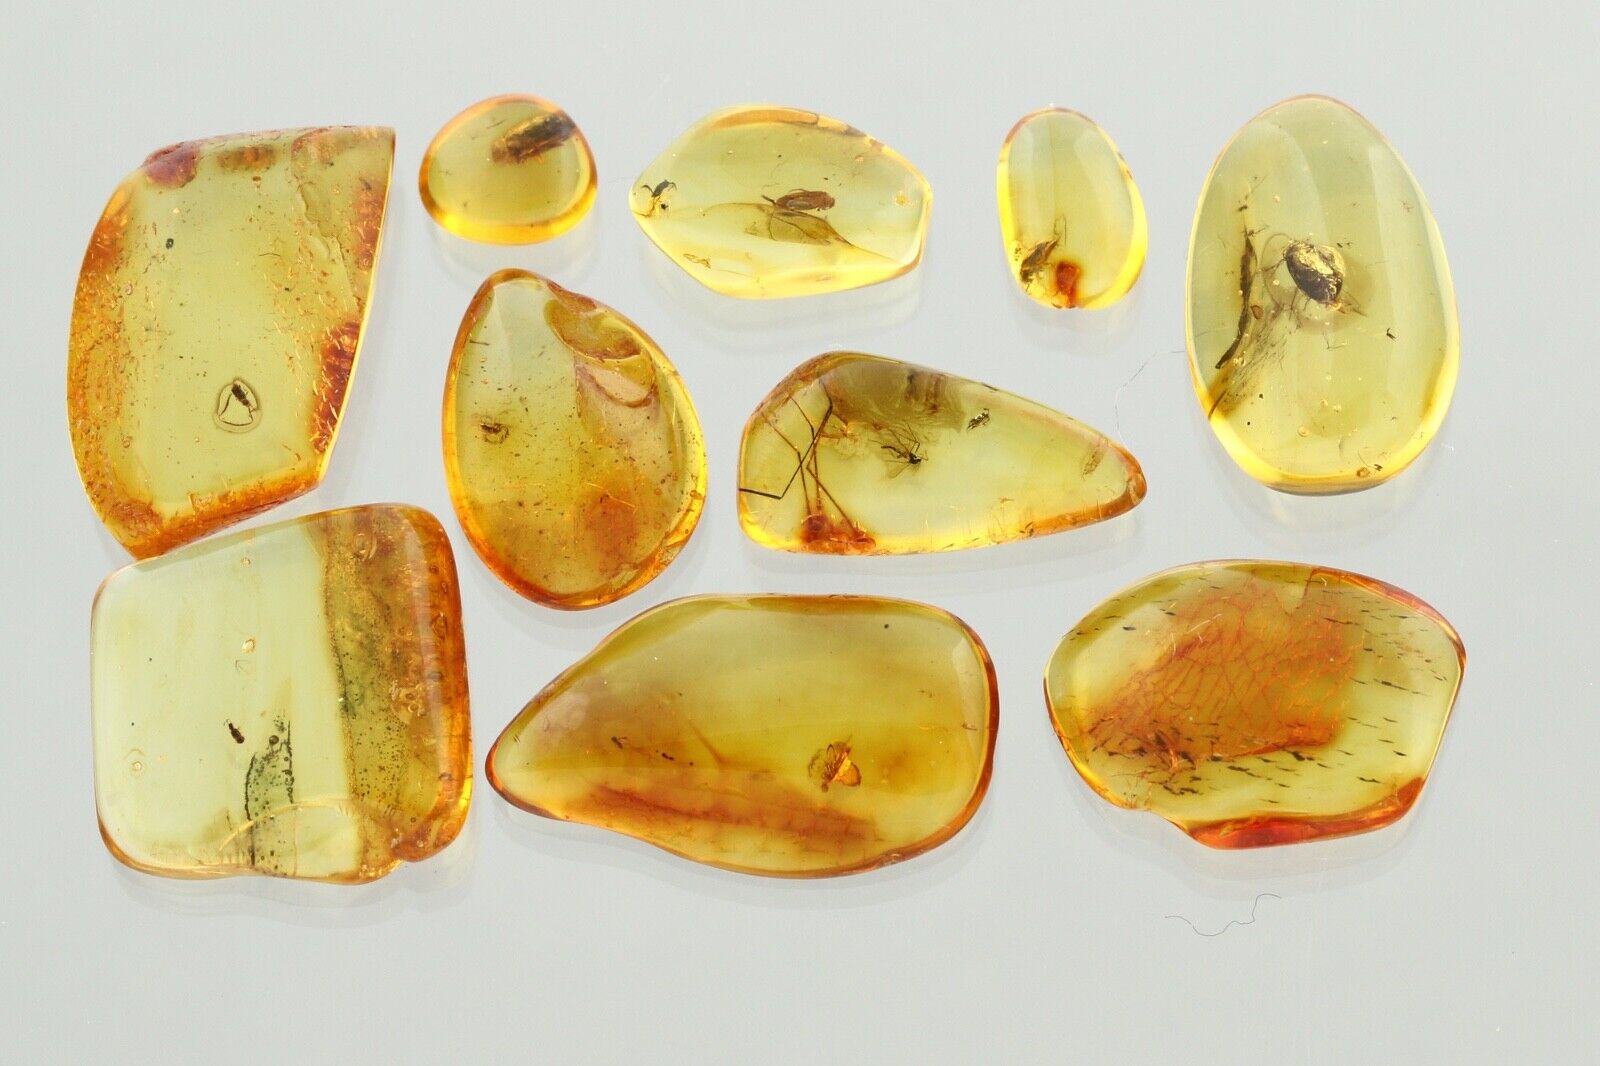 LOT of 10 Fossil BEETLES Inclusions Genuine BALTIC AMBER Stones 5.7g 240201-7